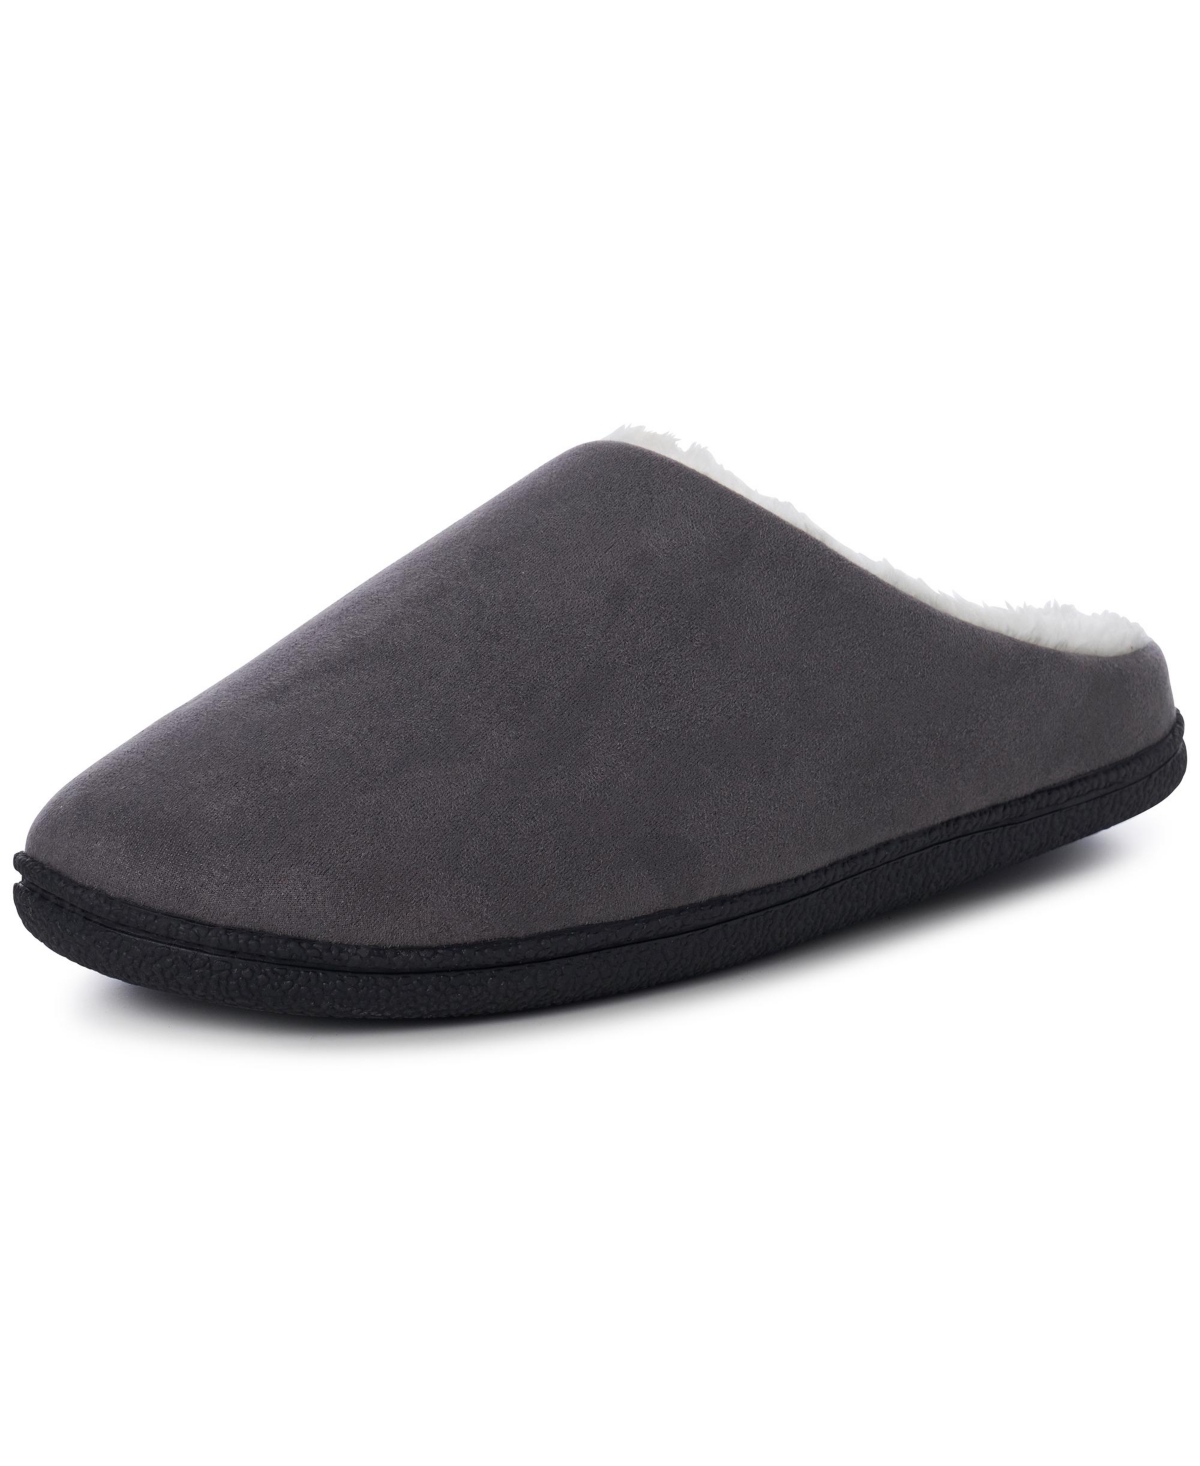 Mens Memory Foam Clog Slippers Indoor Comfort Slip On House Shoes - Gray